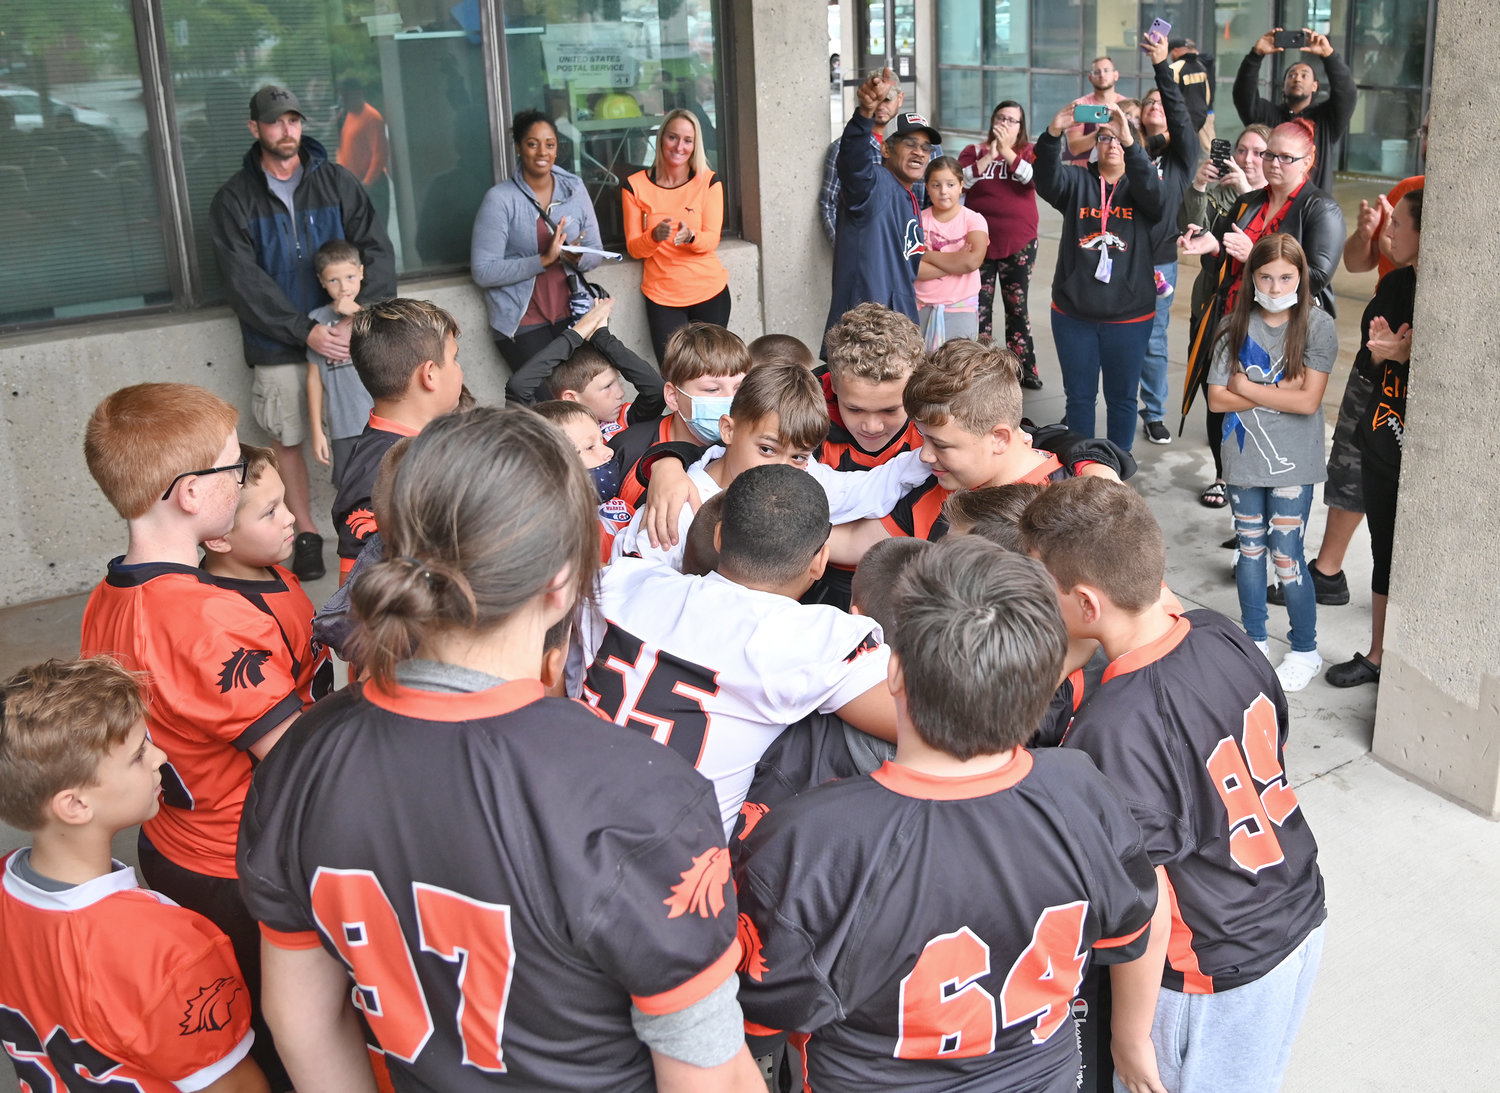 FOOTBALL ON HOLD — Members of the Rome Colts 12U football team huddle up outside City Hall Thursday in hopes that someone would listen to their pleas to be allowed to play again. As a result of the fight, tackle football has been suspended in Rome for the rest of the season, according to Tri-Valley Pop Warner officials.